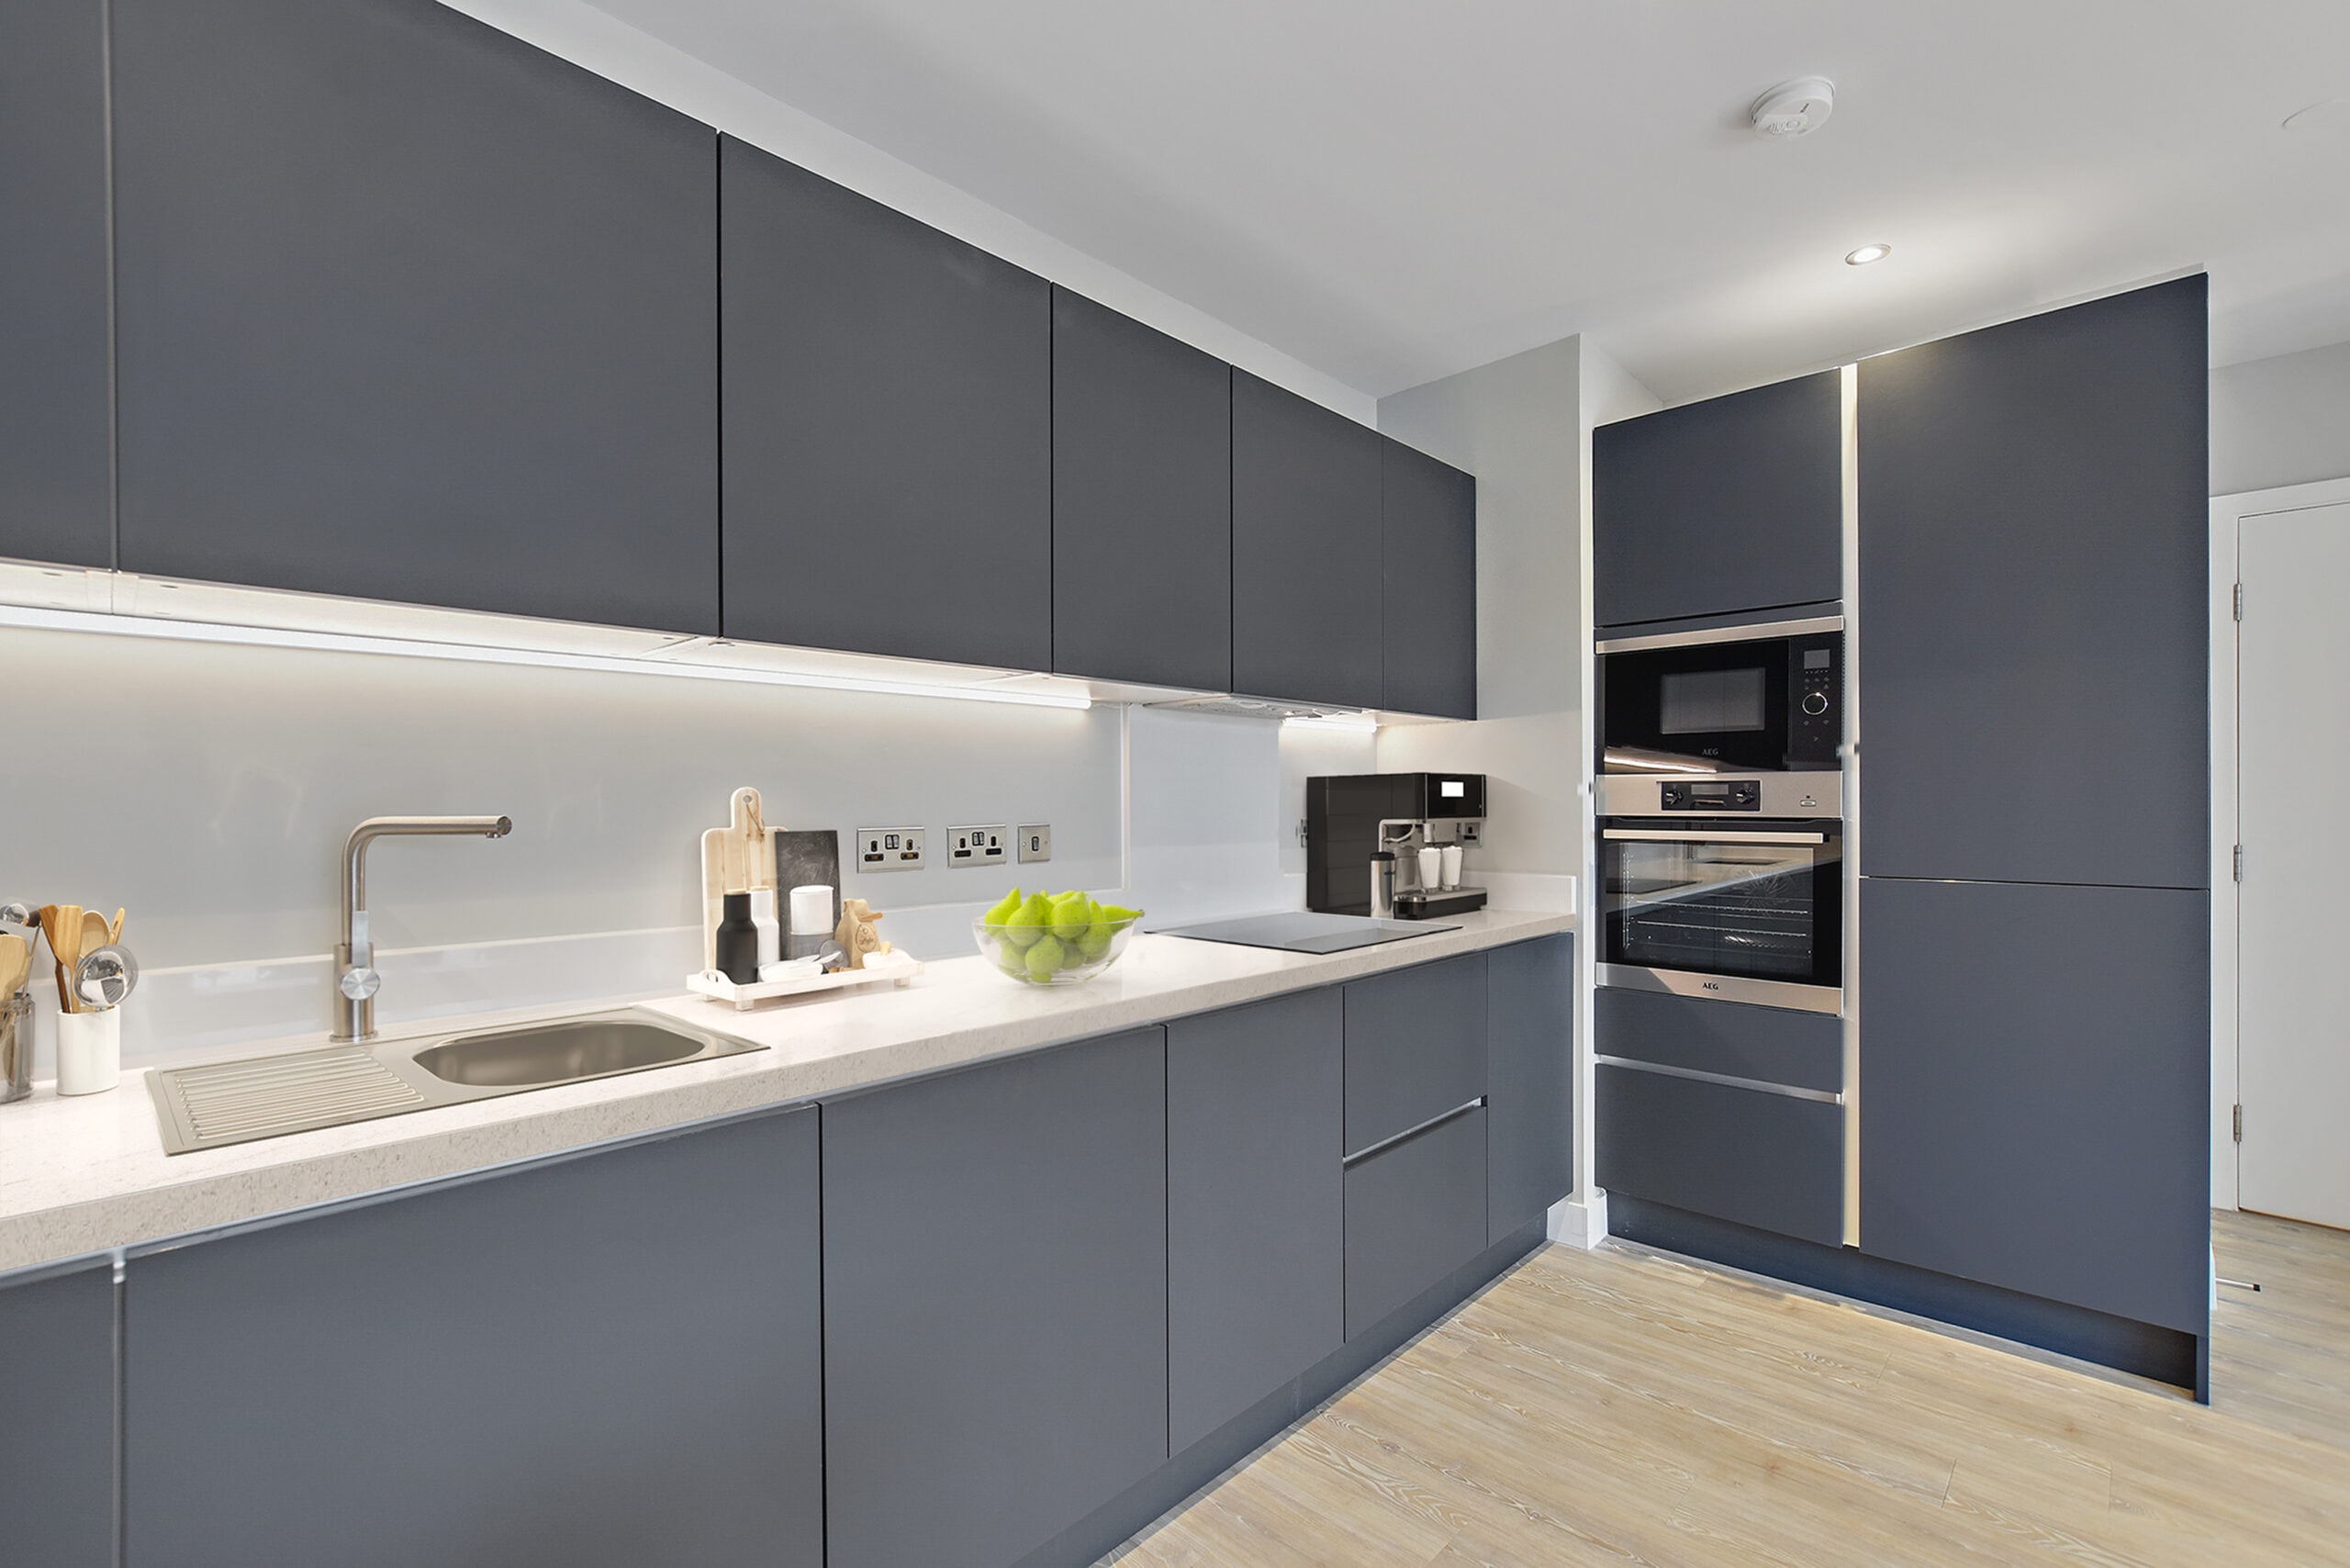 Image of a kitchen at Lampton Parkside in Hounslow, available from NHG Homes - Start your property journey on Share to Buy!